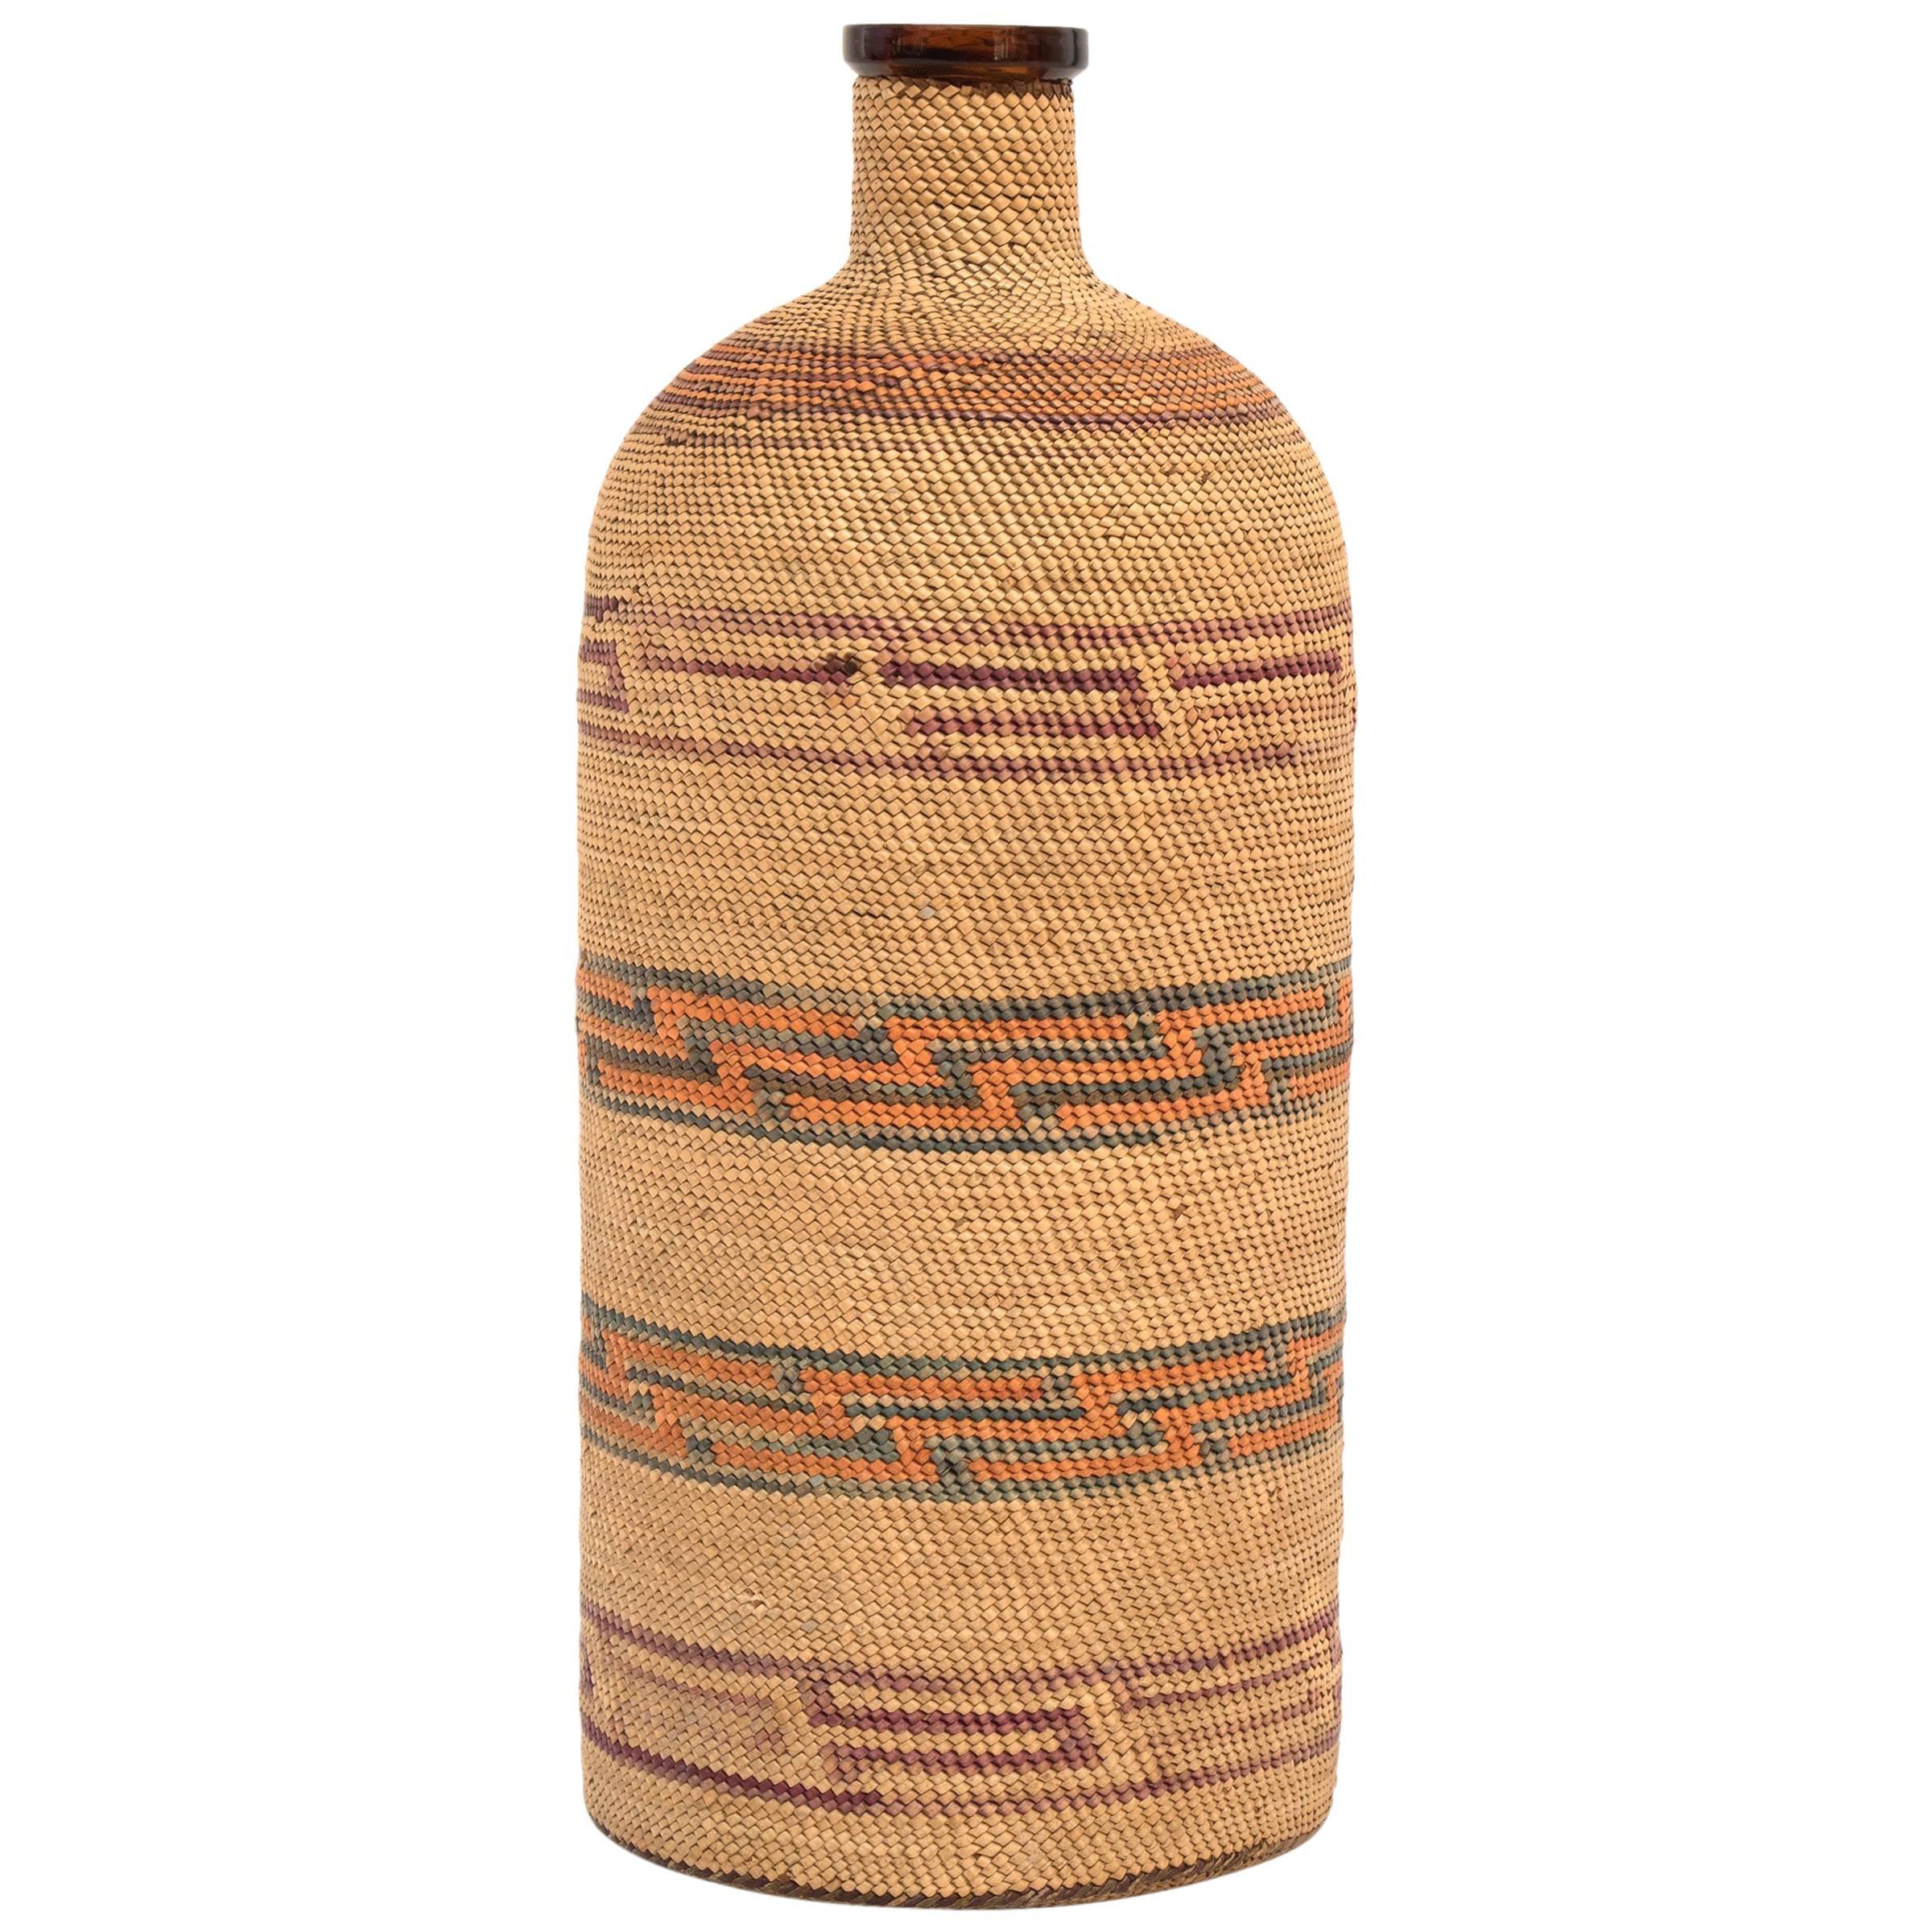 Native American Basketry Woven Bottle, Micmac (Woodlands), 20th Century